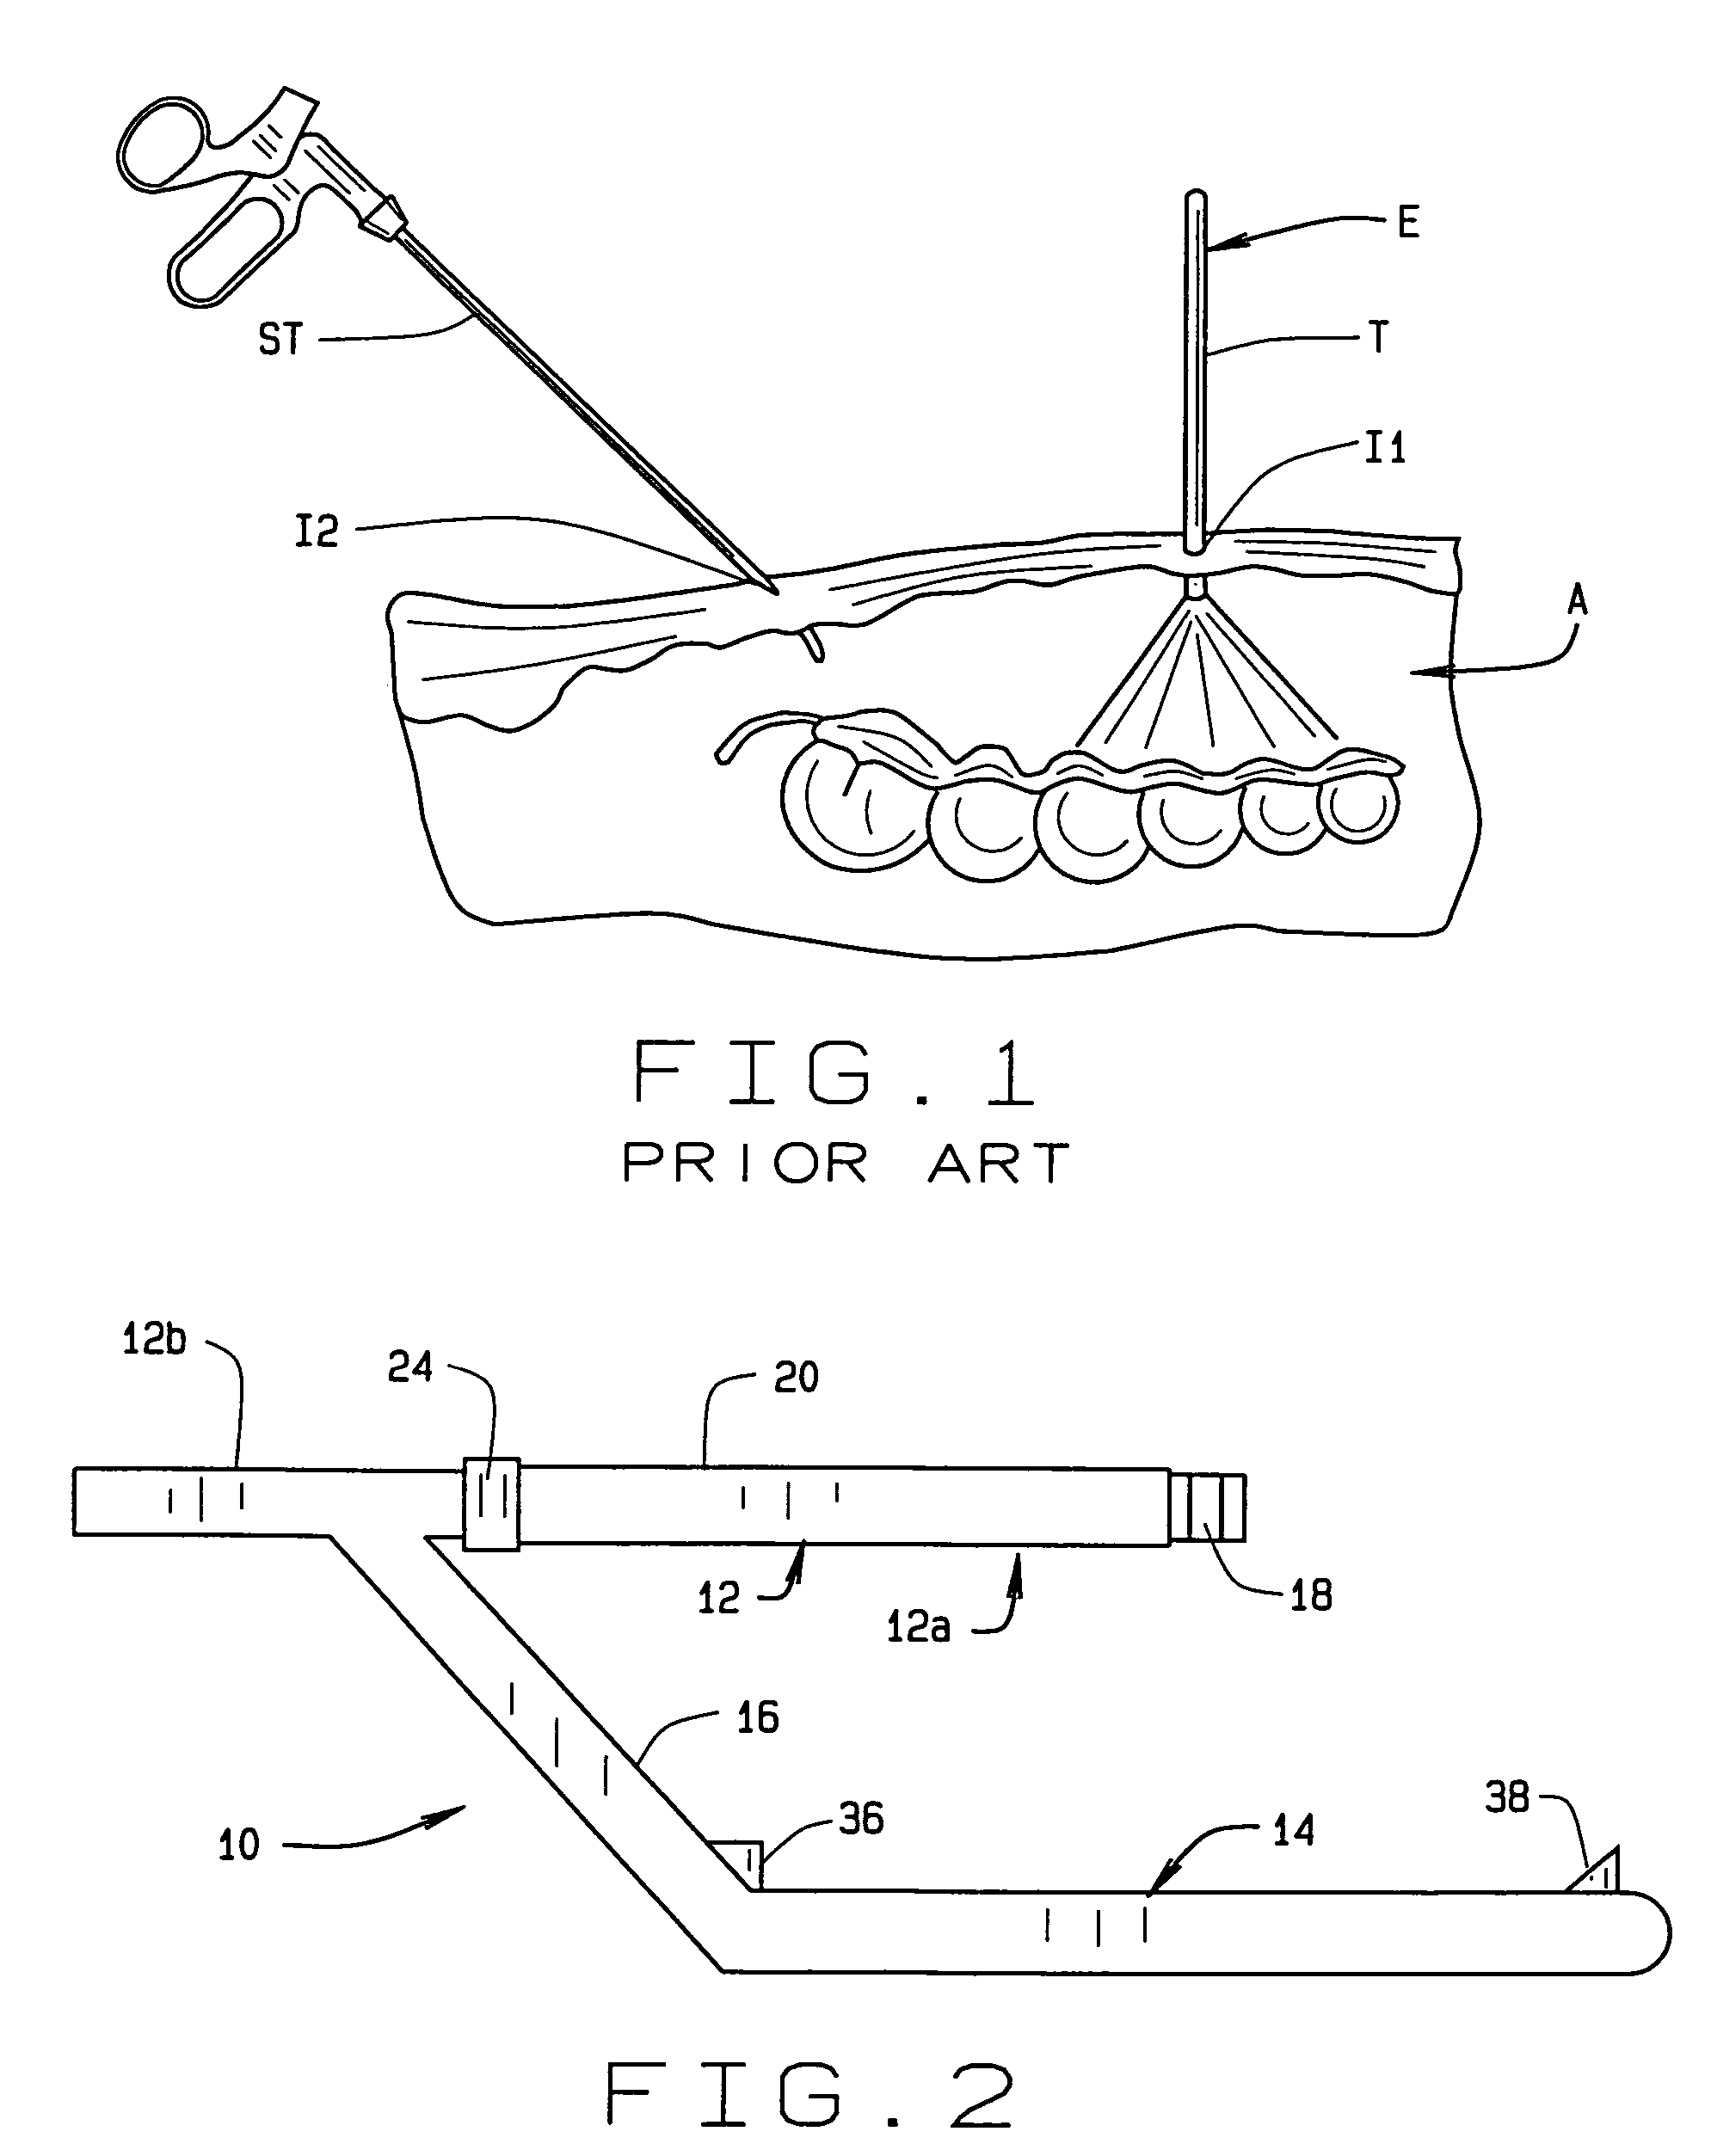 Tool insertion device for use in minimally invasive surgery